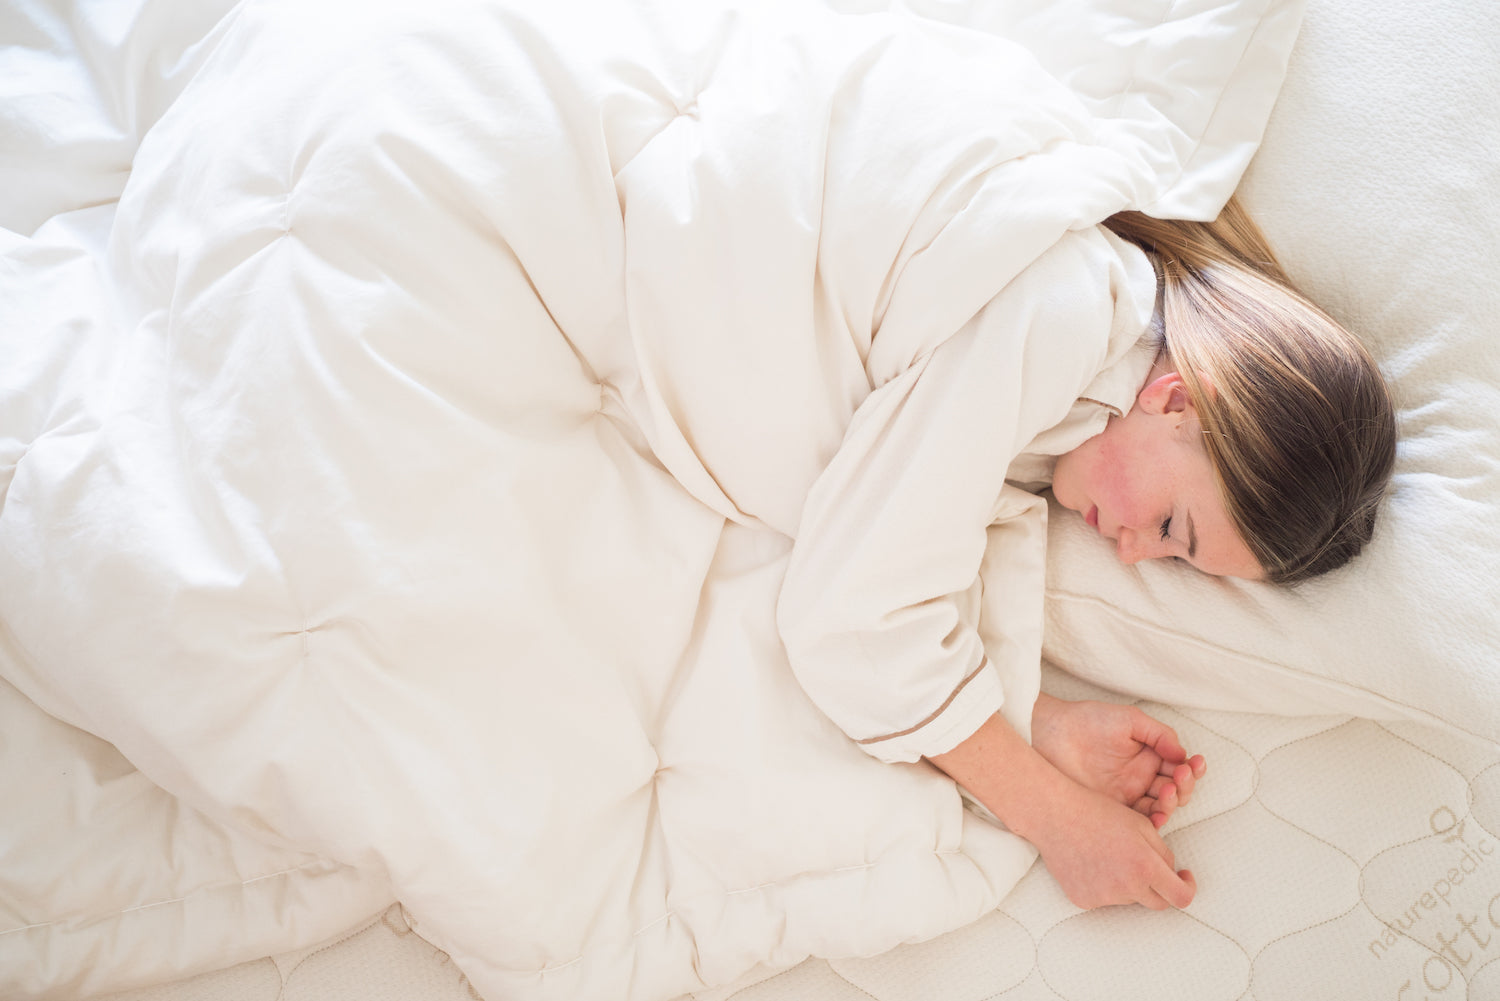 Sleeping Warm During the Cold Winter - 10 Tips for a Cozy Winter Sleep